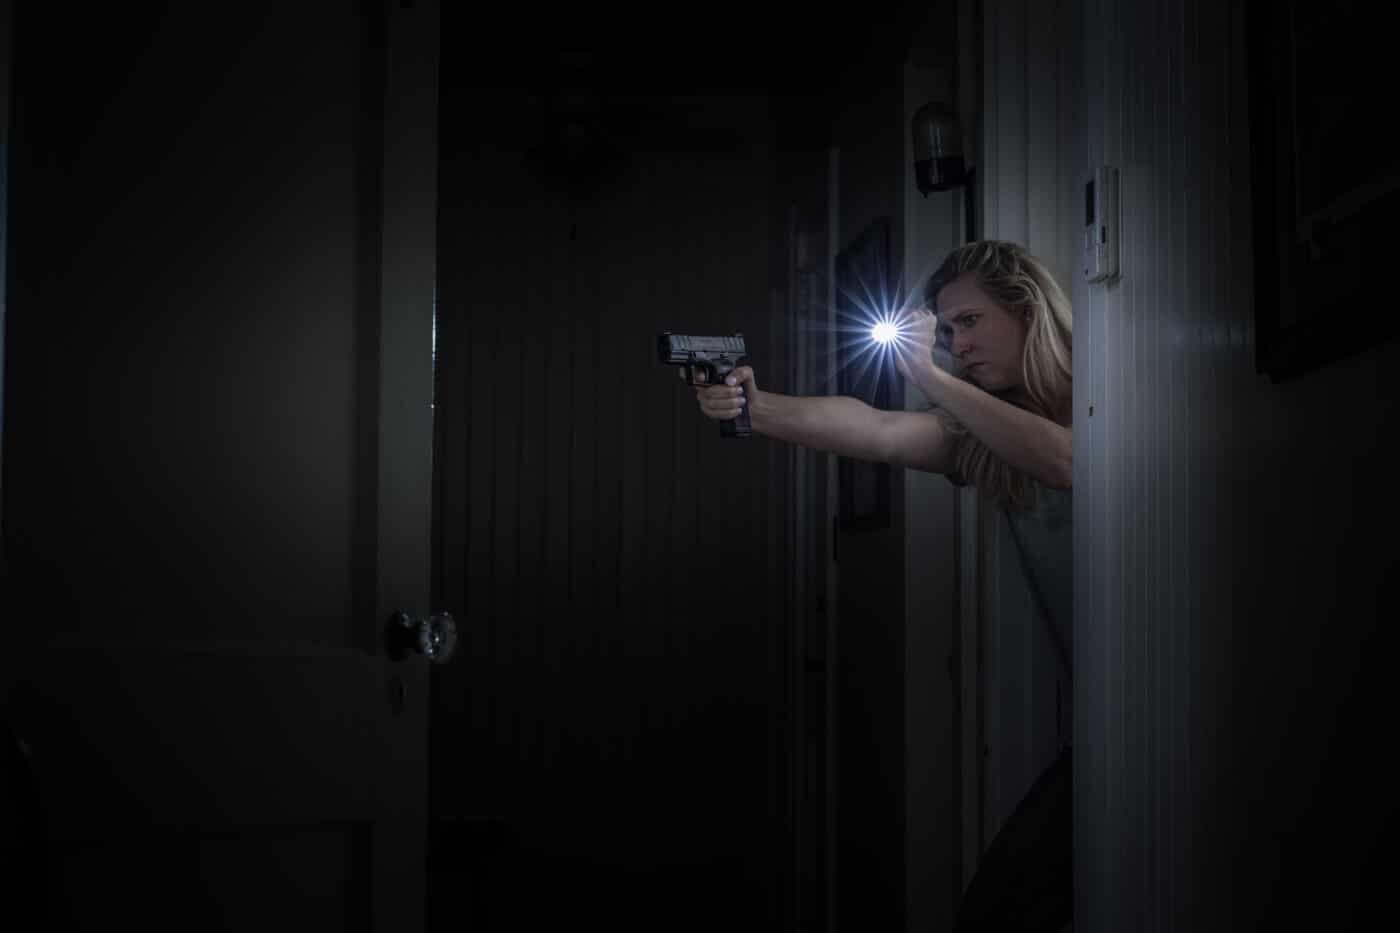 Woman searching a building with pistol drawn and while carrying a handheld light